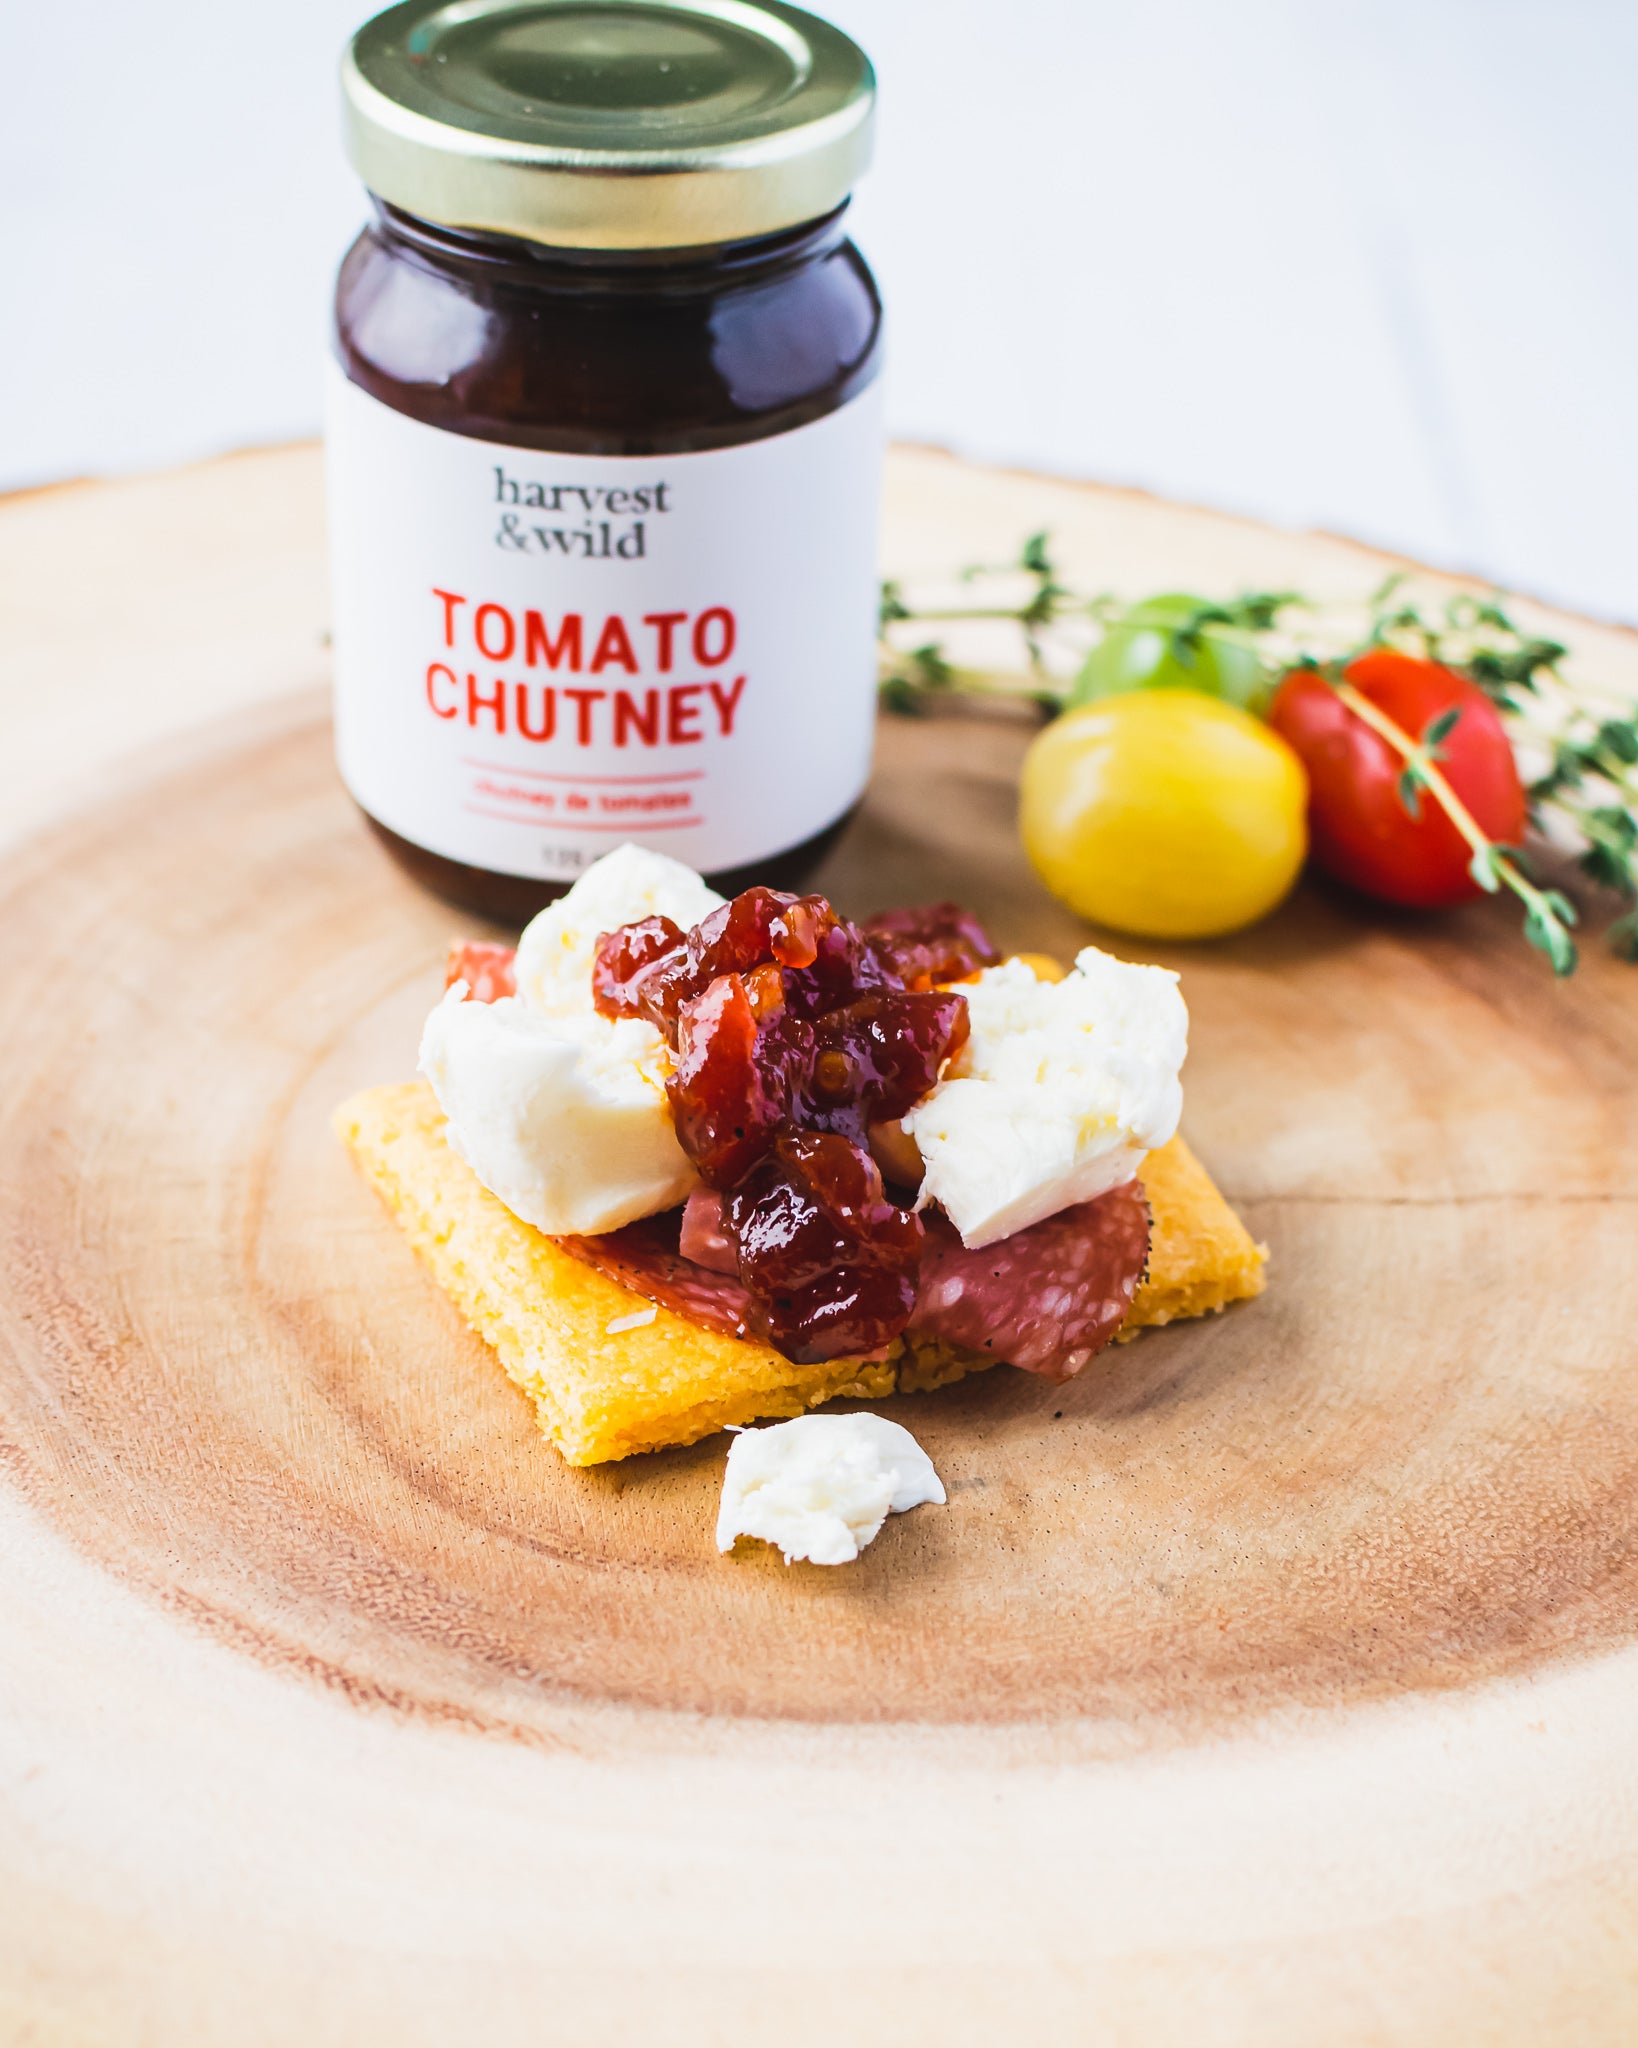 Tomato Chutney on cheese and charcuterie - Harvest and Wild